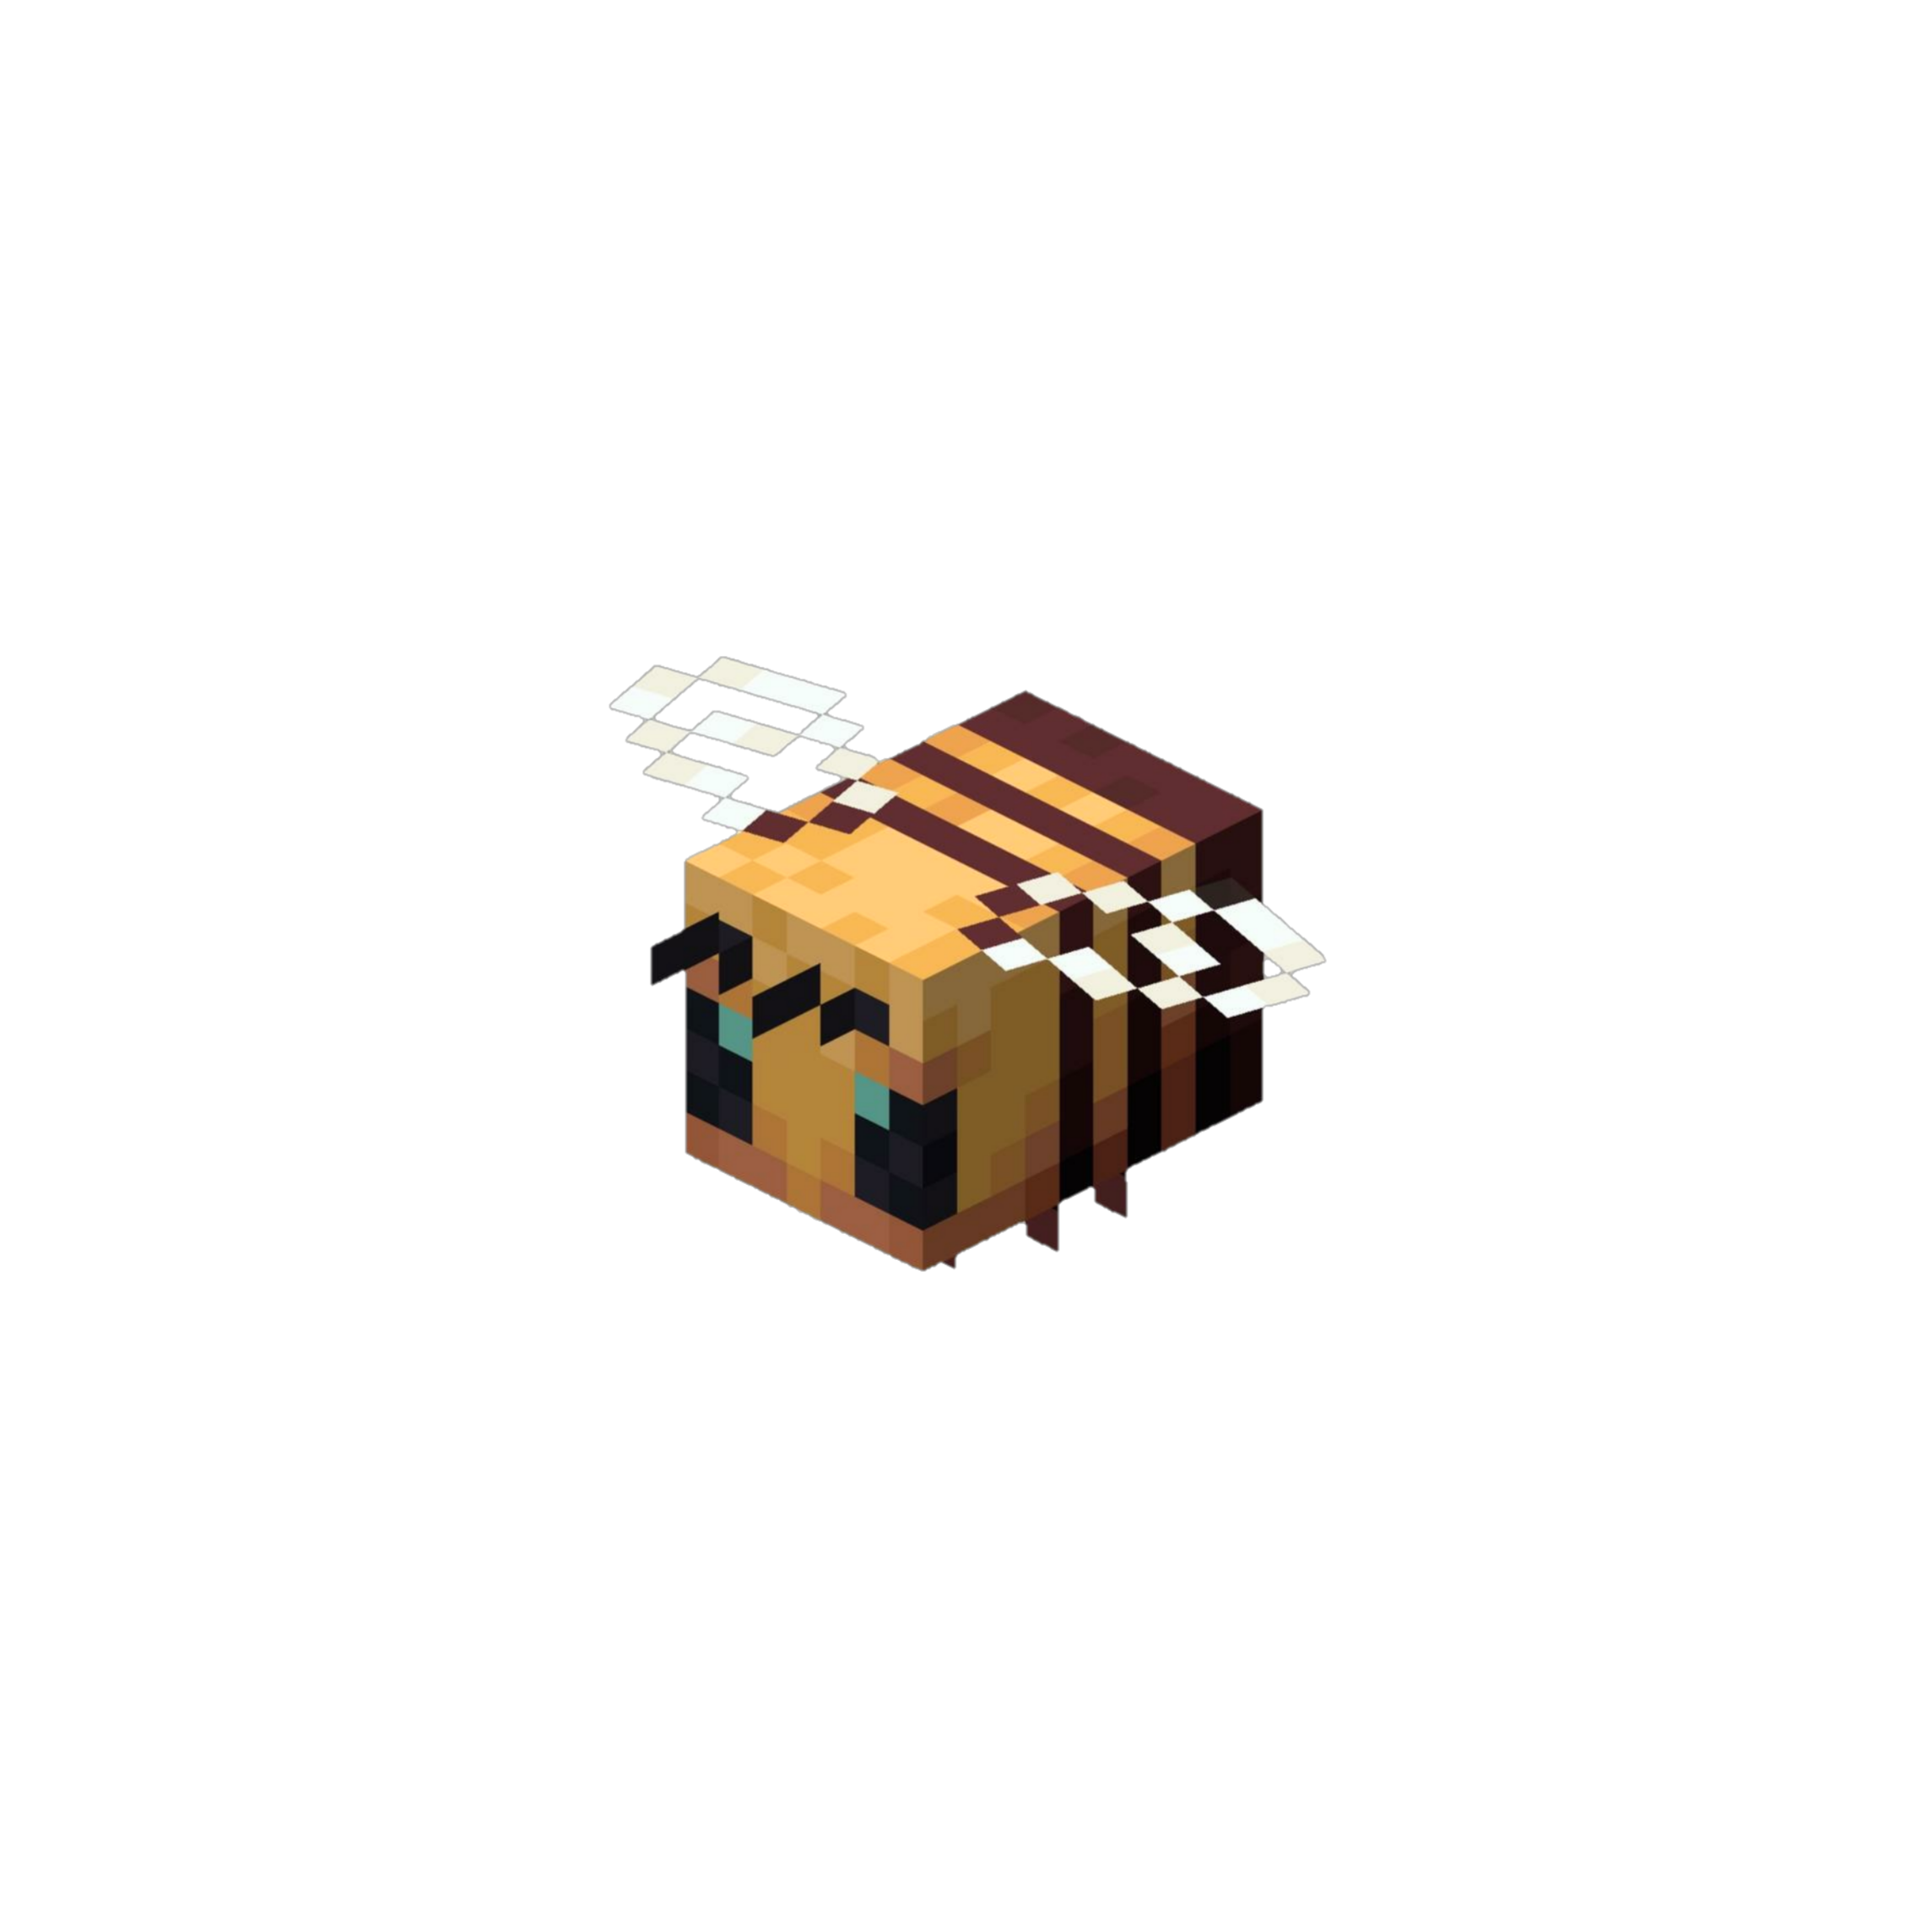 This visual is about minecraft bee freetoedit #minecraft #bee.